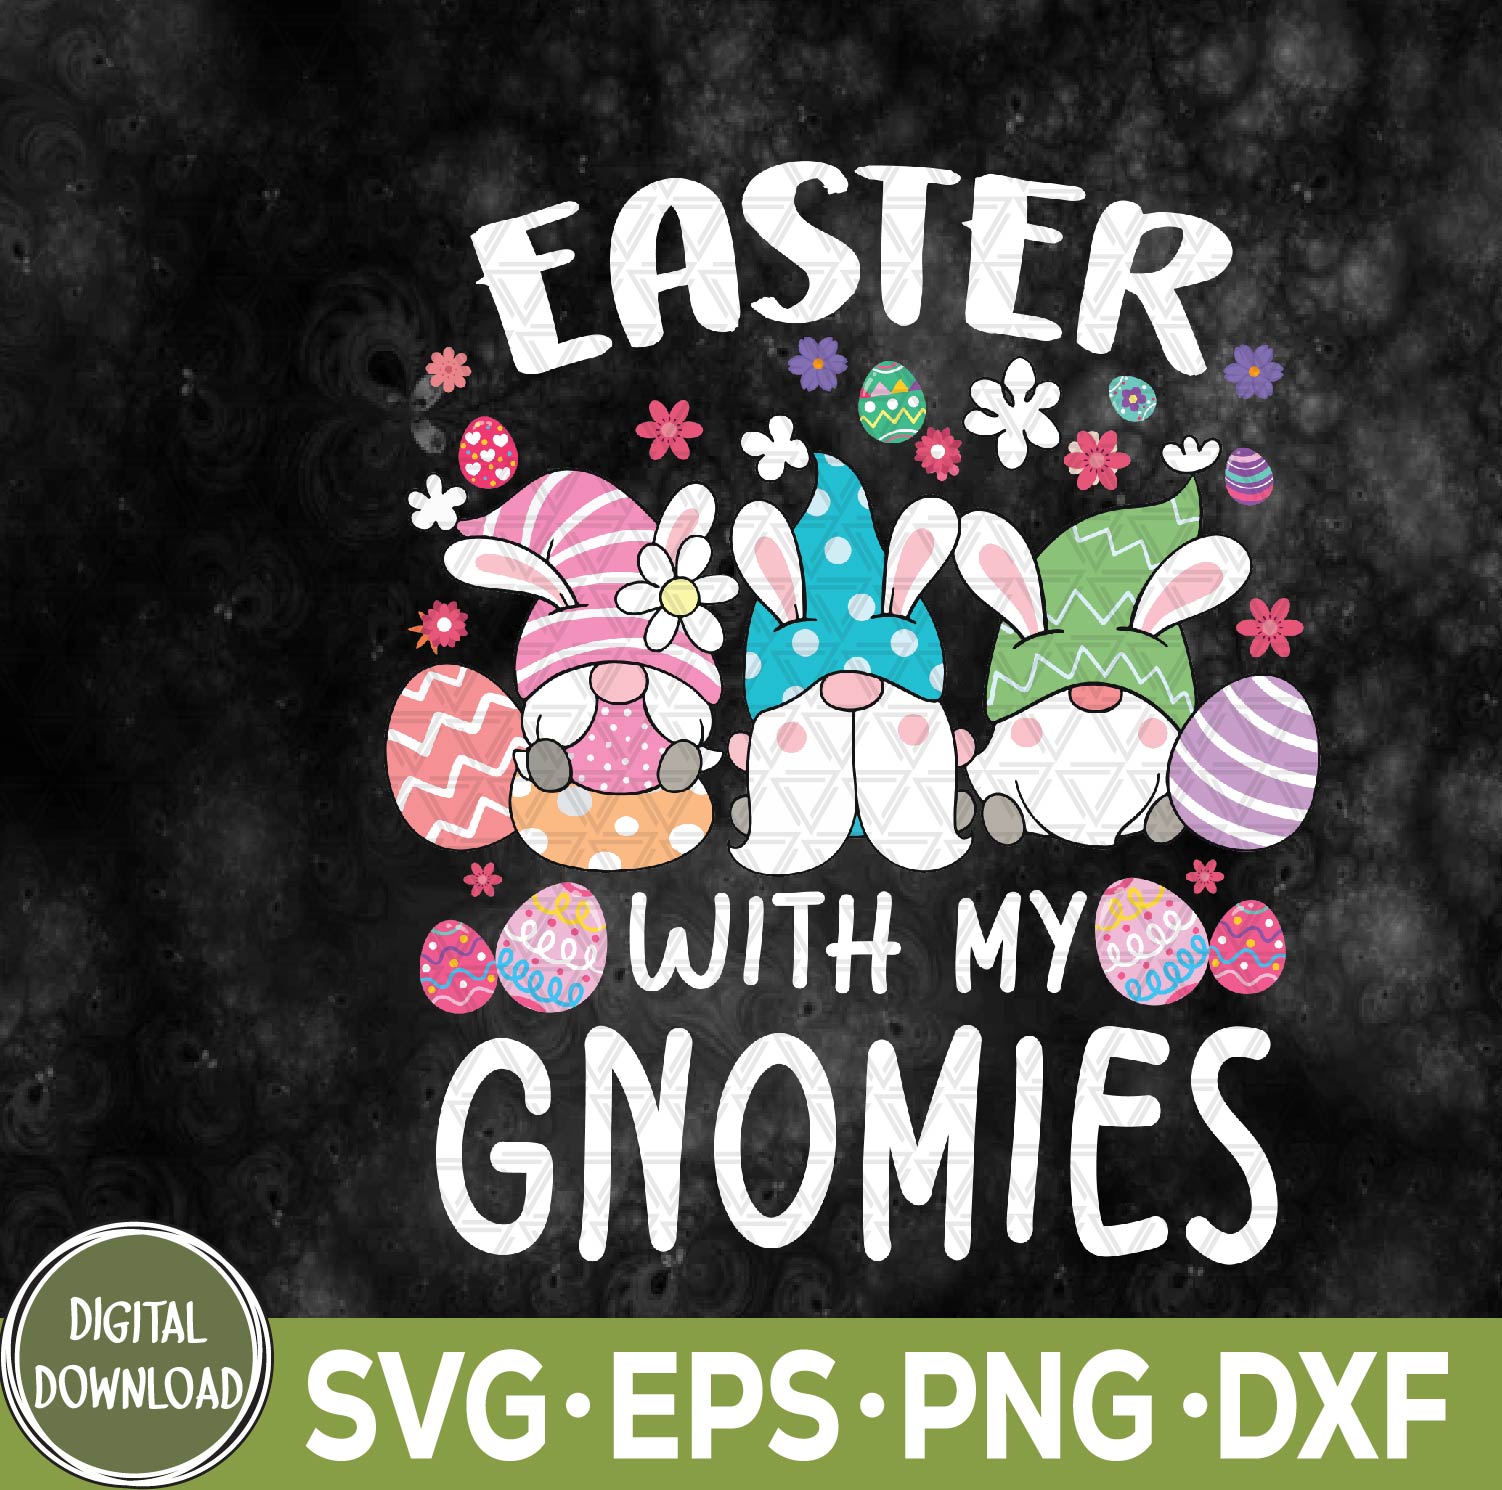 WTMNEW9file 09 41 Easter With My Gnomies Happy Easter Day Bunny Eggs Svg, Eps, Png, Dxf